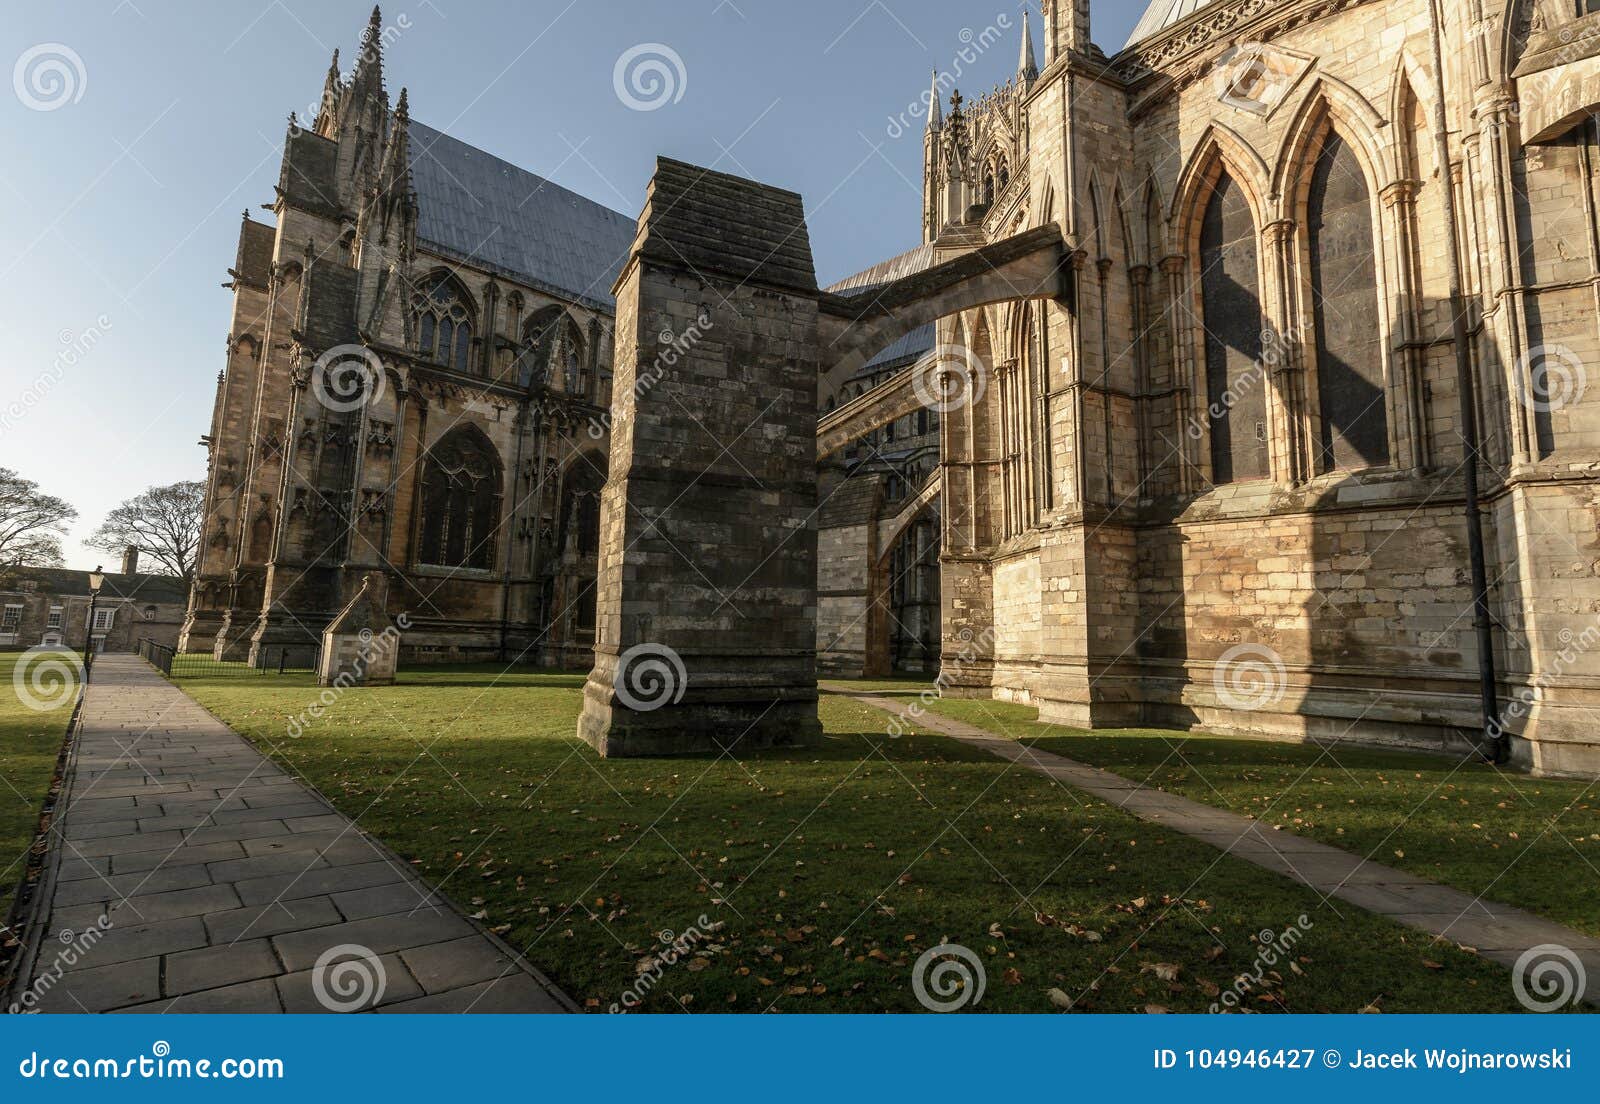 flying buttress of lincoln cathedral a